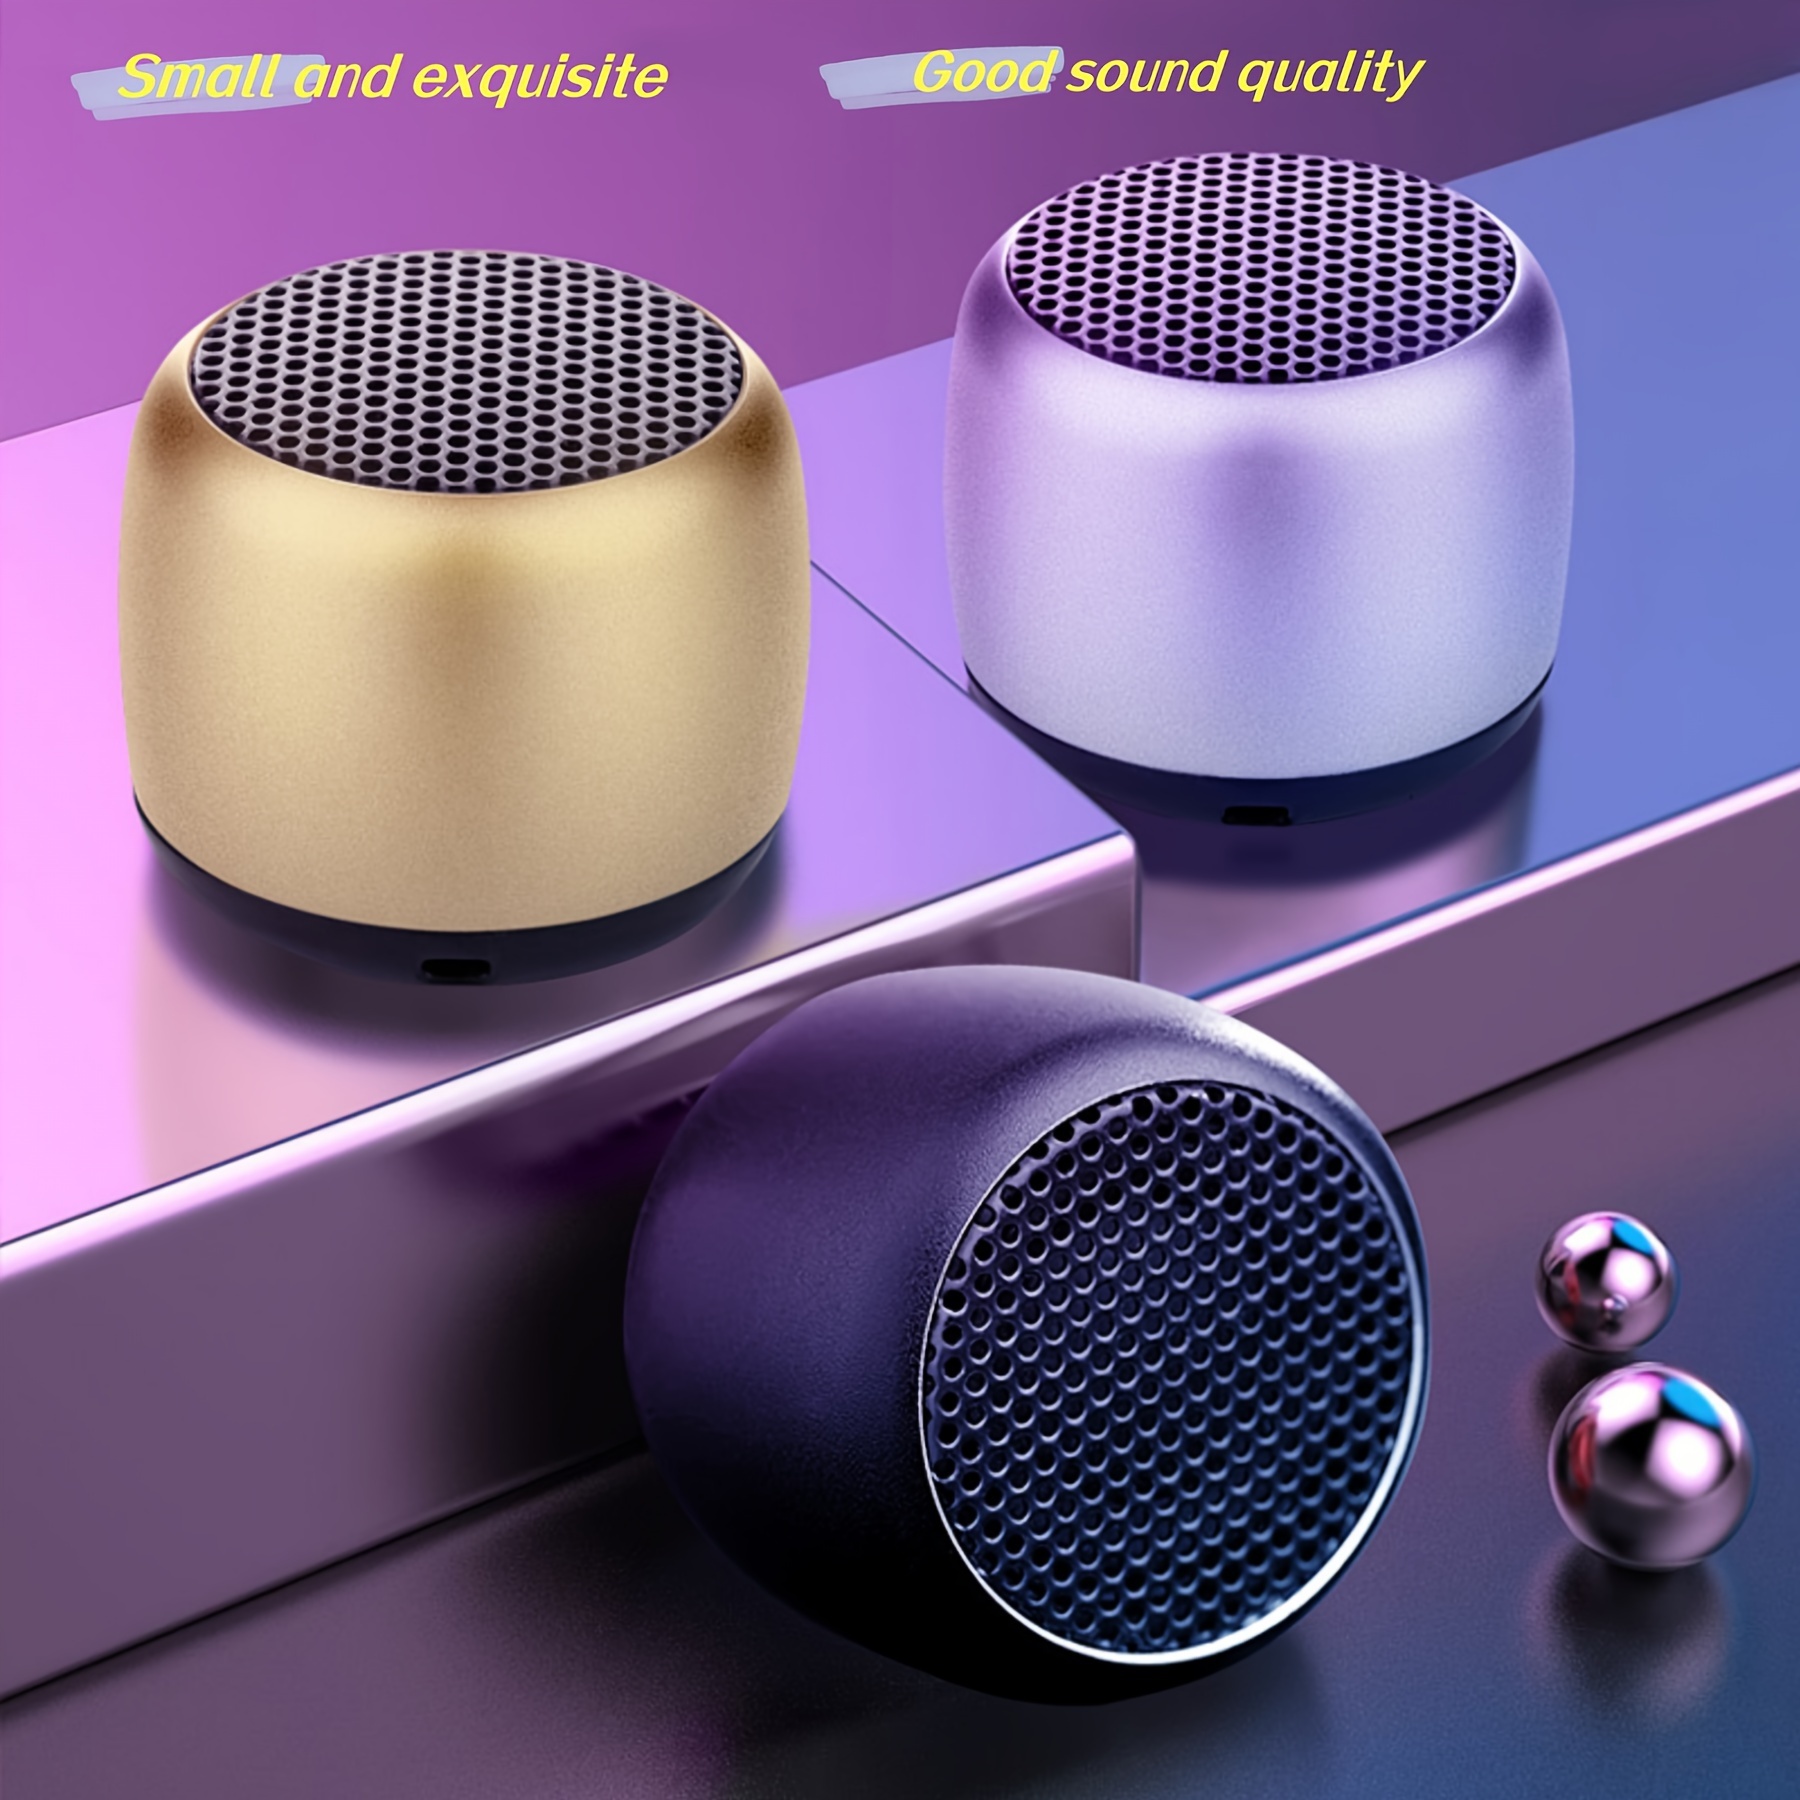 music stereo surround mini usb outdoor subwoofer speaker audio player speaker microphone for music chase running gaming fashion women student wireless small speaker portable music subwoofer column bass stereo christmas holiday gift